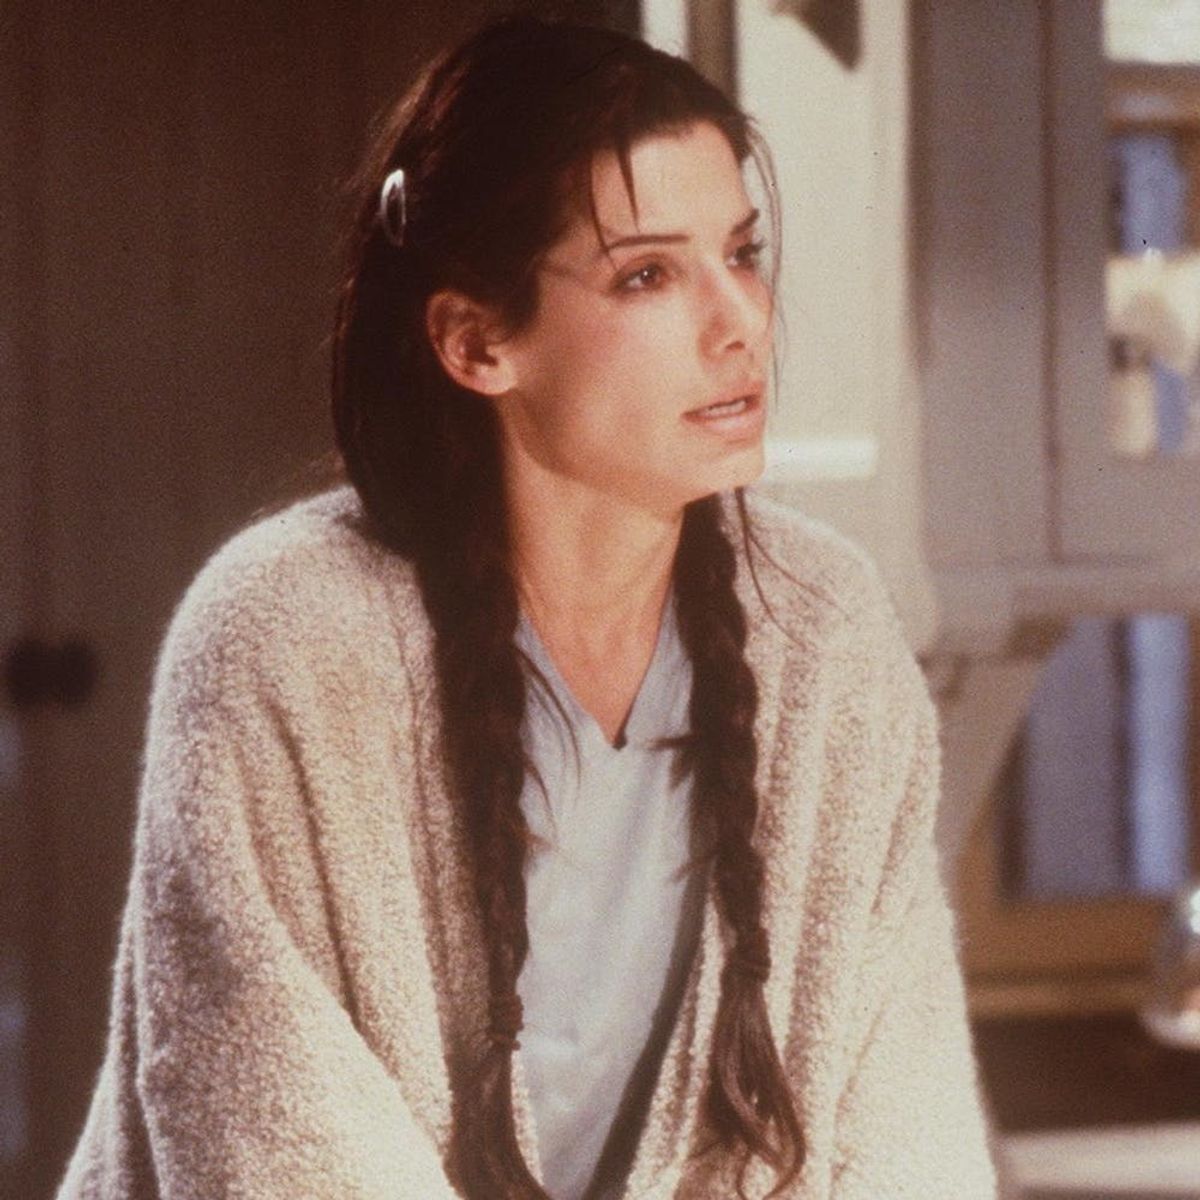 “Practical Magic” Director Says the Film Was Cursed by an Actual Witch